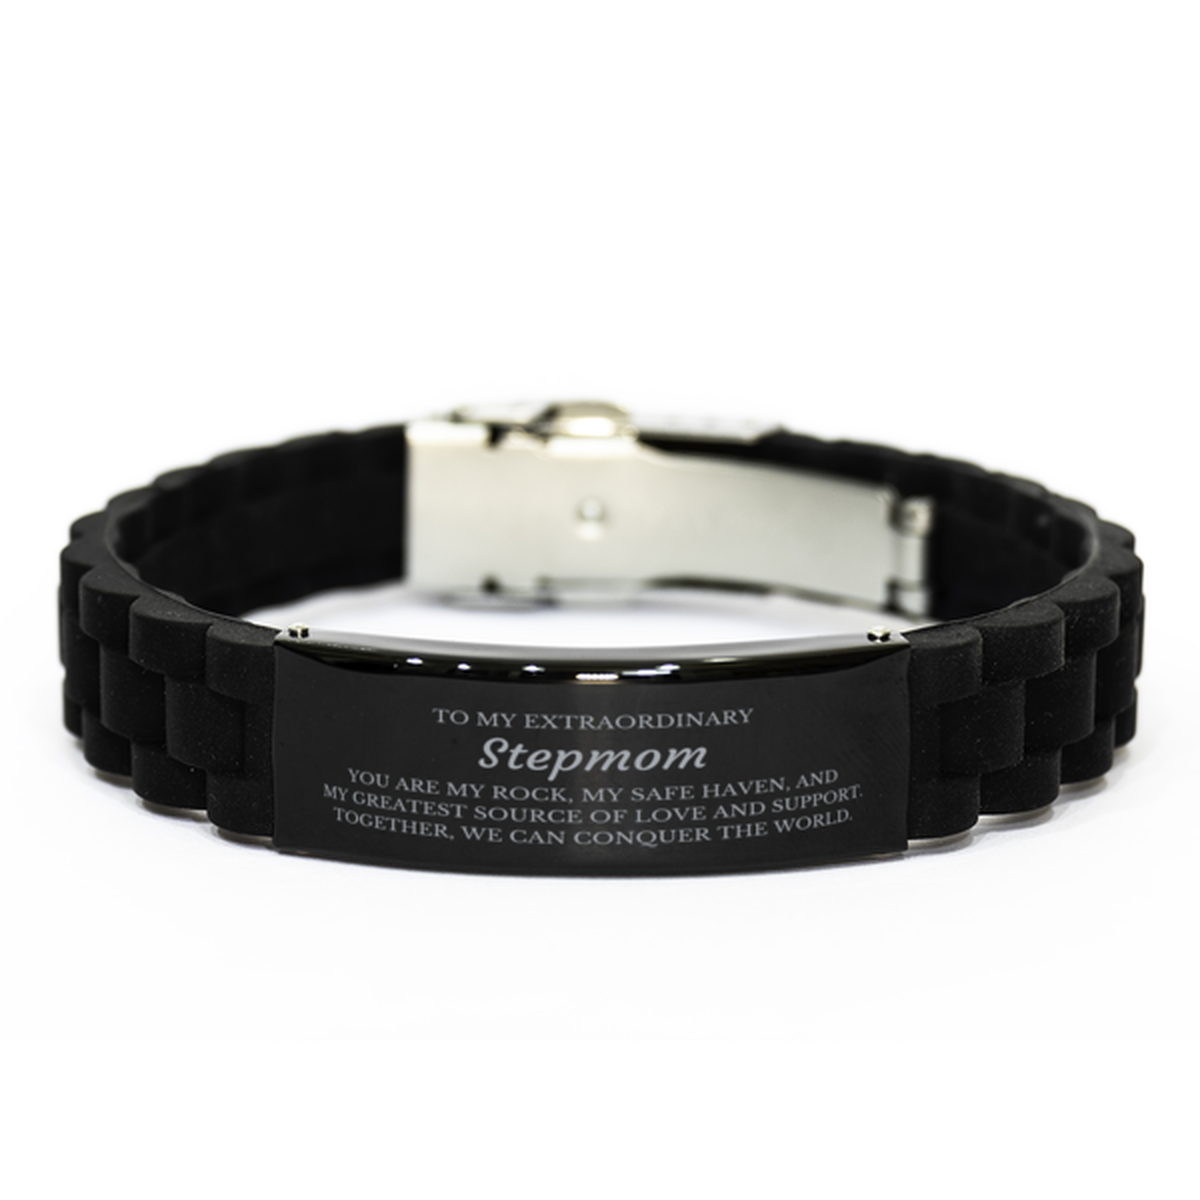 To My Extraordinary Stepmom Gifts, Together, we can conquer the world, Birthday Black Glidelock Clasp Bracelet For Stepmom, Christmas Gifts For Stepmom